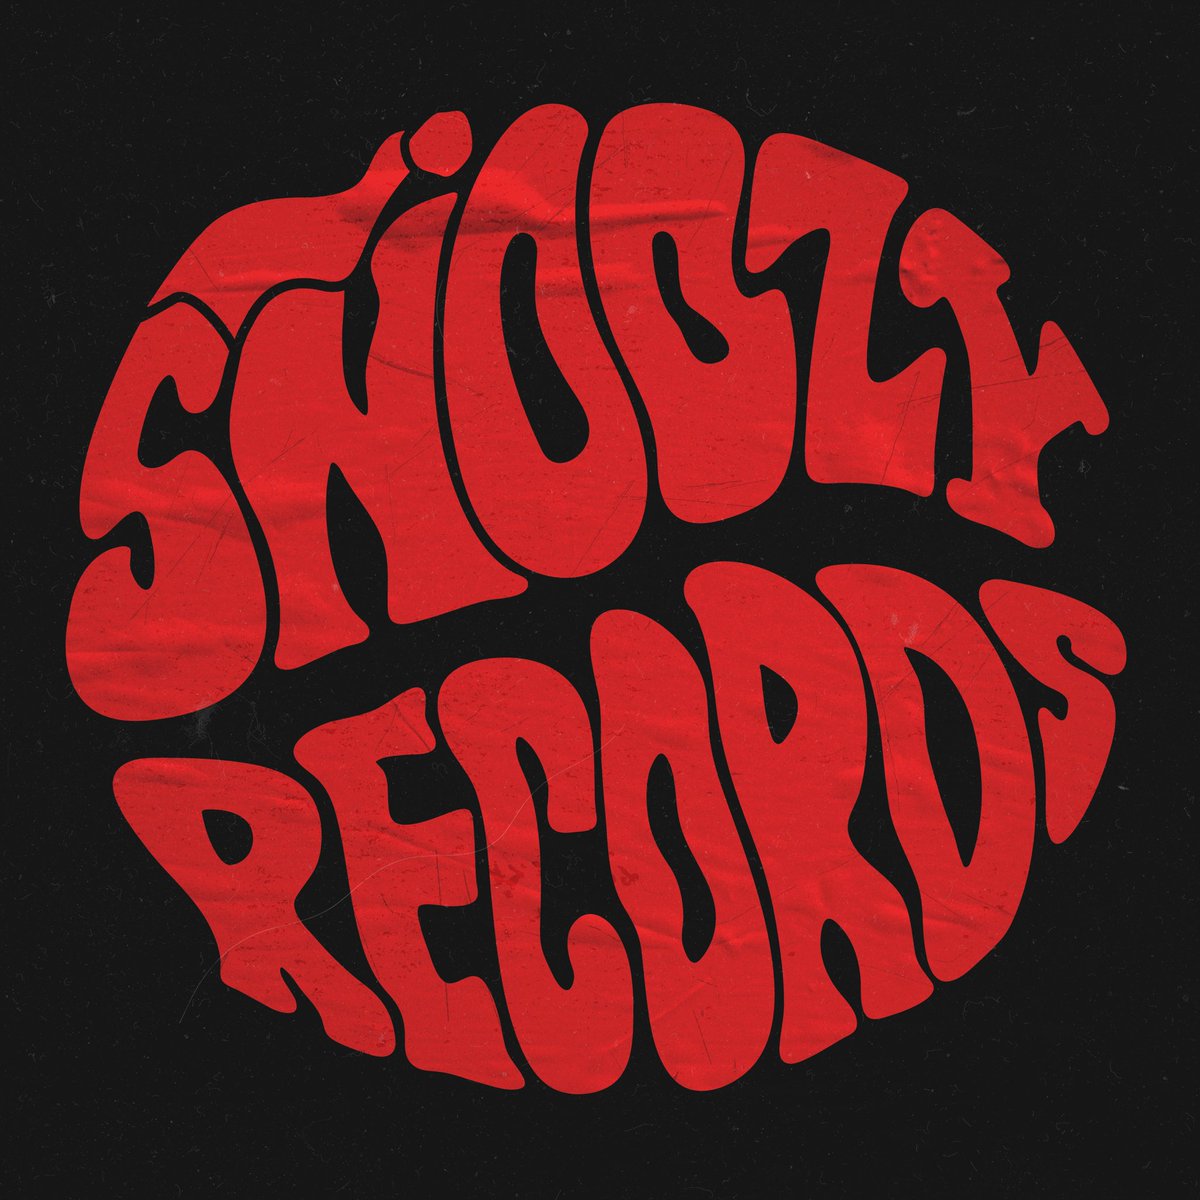 Hey my dudes! We are Snoozy Records 🤟

We are a multi-genre development label who want to help up and coming artists around Glasgow release and play their sounds ⚡️ We have exciting stuff planned so please stay tuned for more announcements! 👀
 
#glasgow #glasgowlive #glasgow